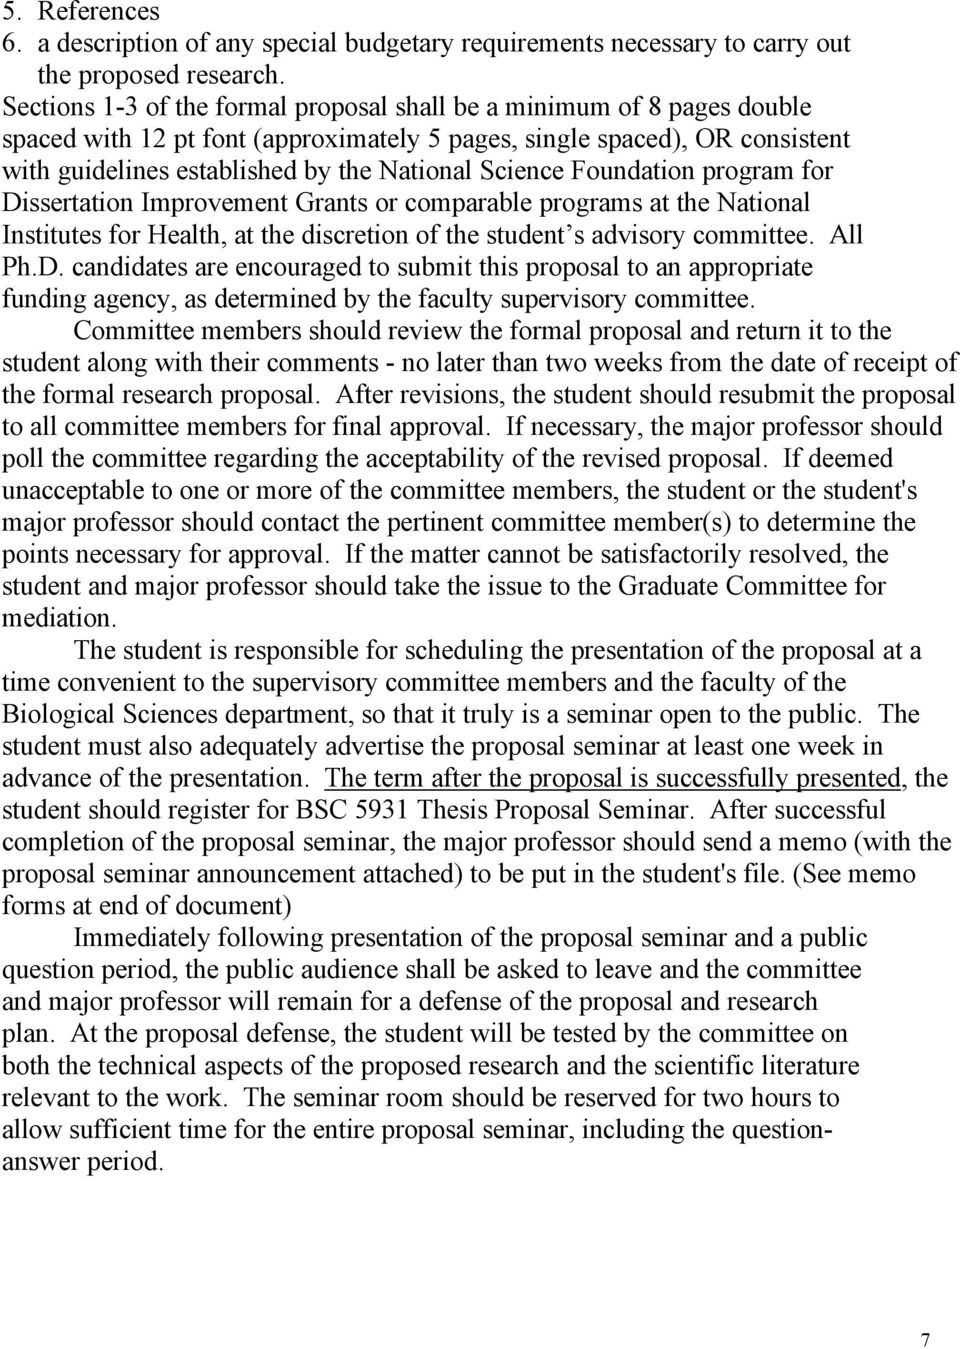 Science Foundation program for Dissertation Improvement Grants or comparable programs at the National Institutes for Health, at the discretion of the student s advisory committee. All Ph.D. candidates are encouraged to submit this proposal to an appropriate funding agency, as determined by the faculty supervisory committee.